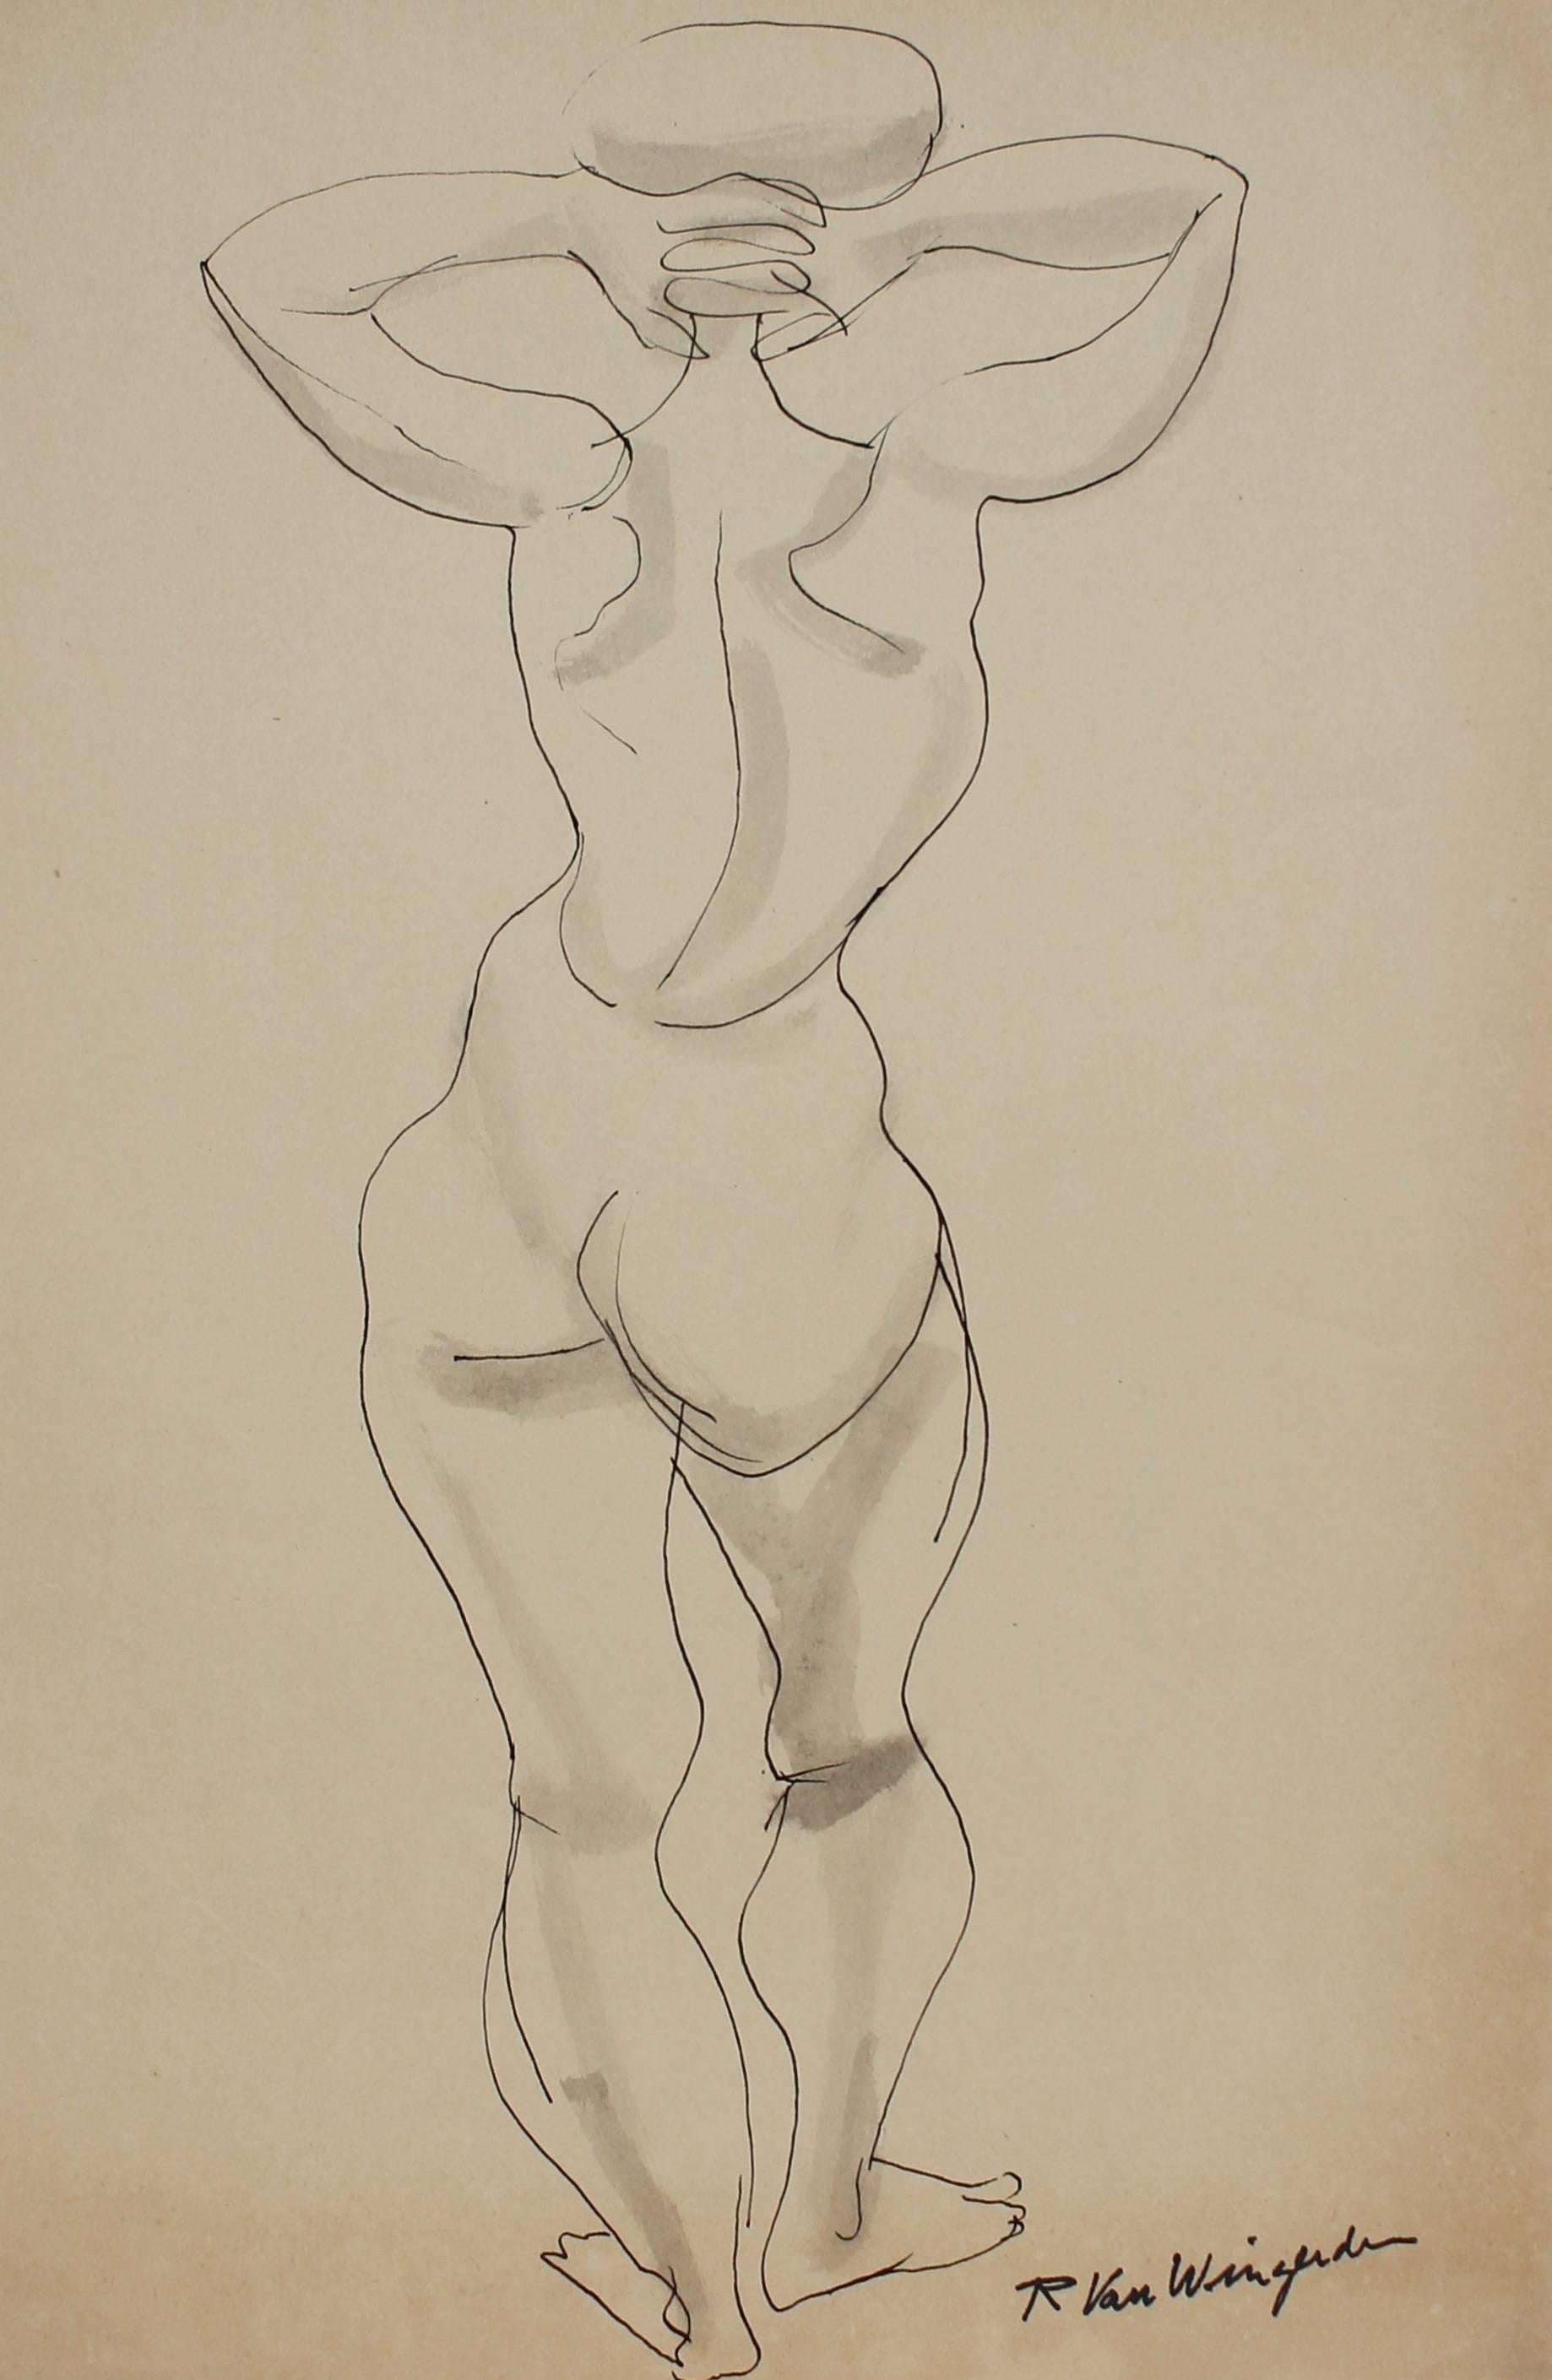 Monochromatic Expressionist Figure in Ink, Mid 20th Century